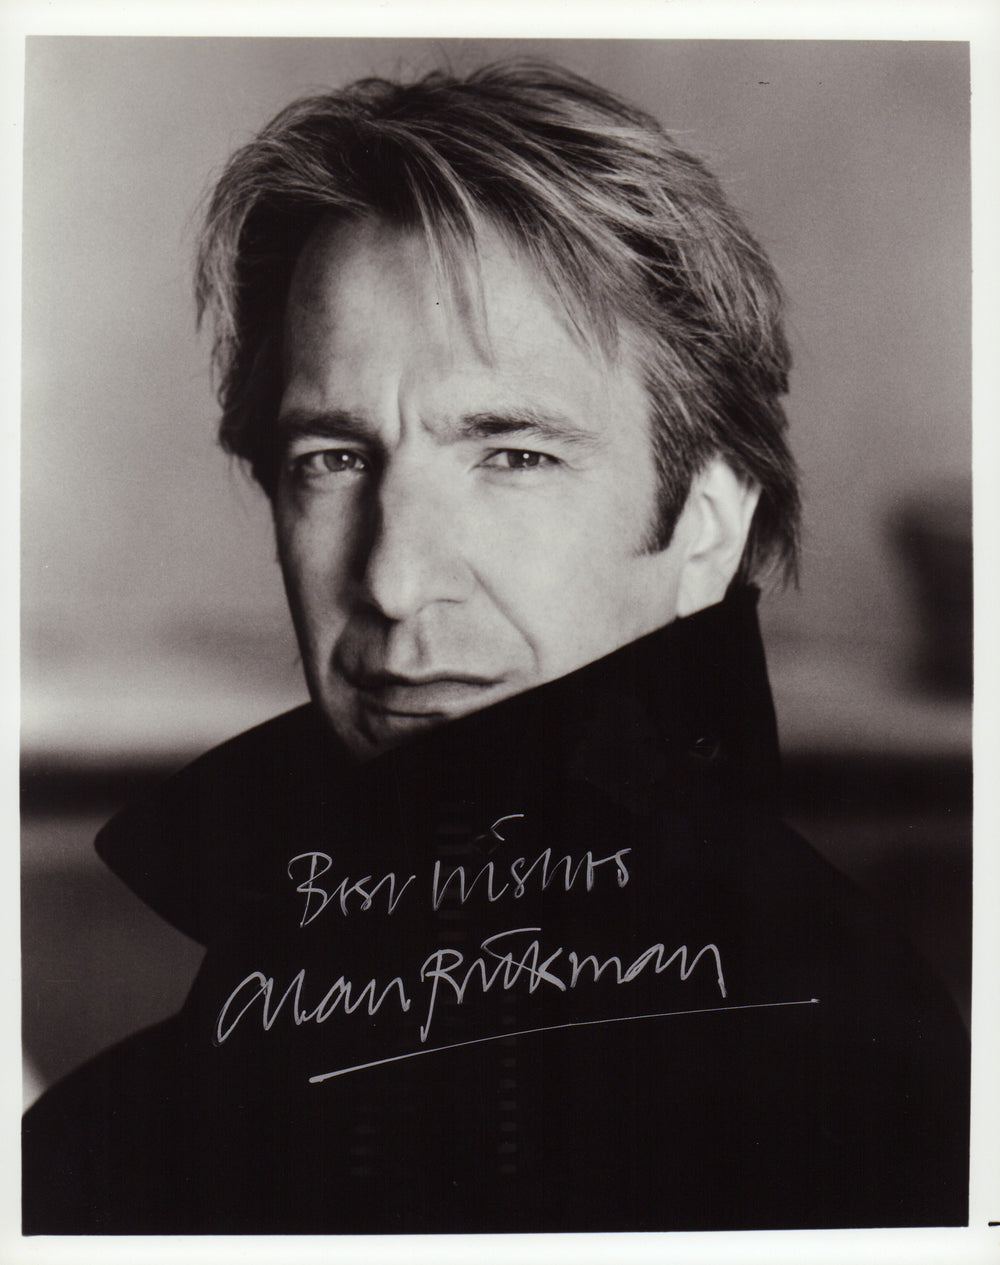 Alan Rickman from Die Hard & Harry Potter Signed 8x10 Photo